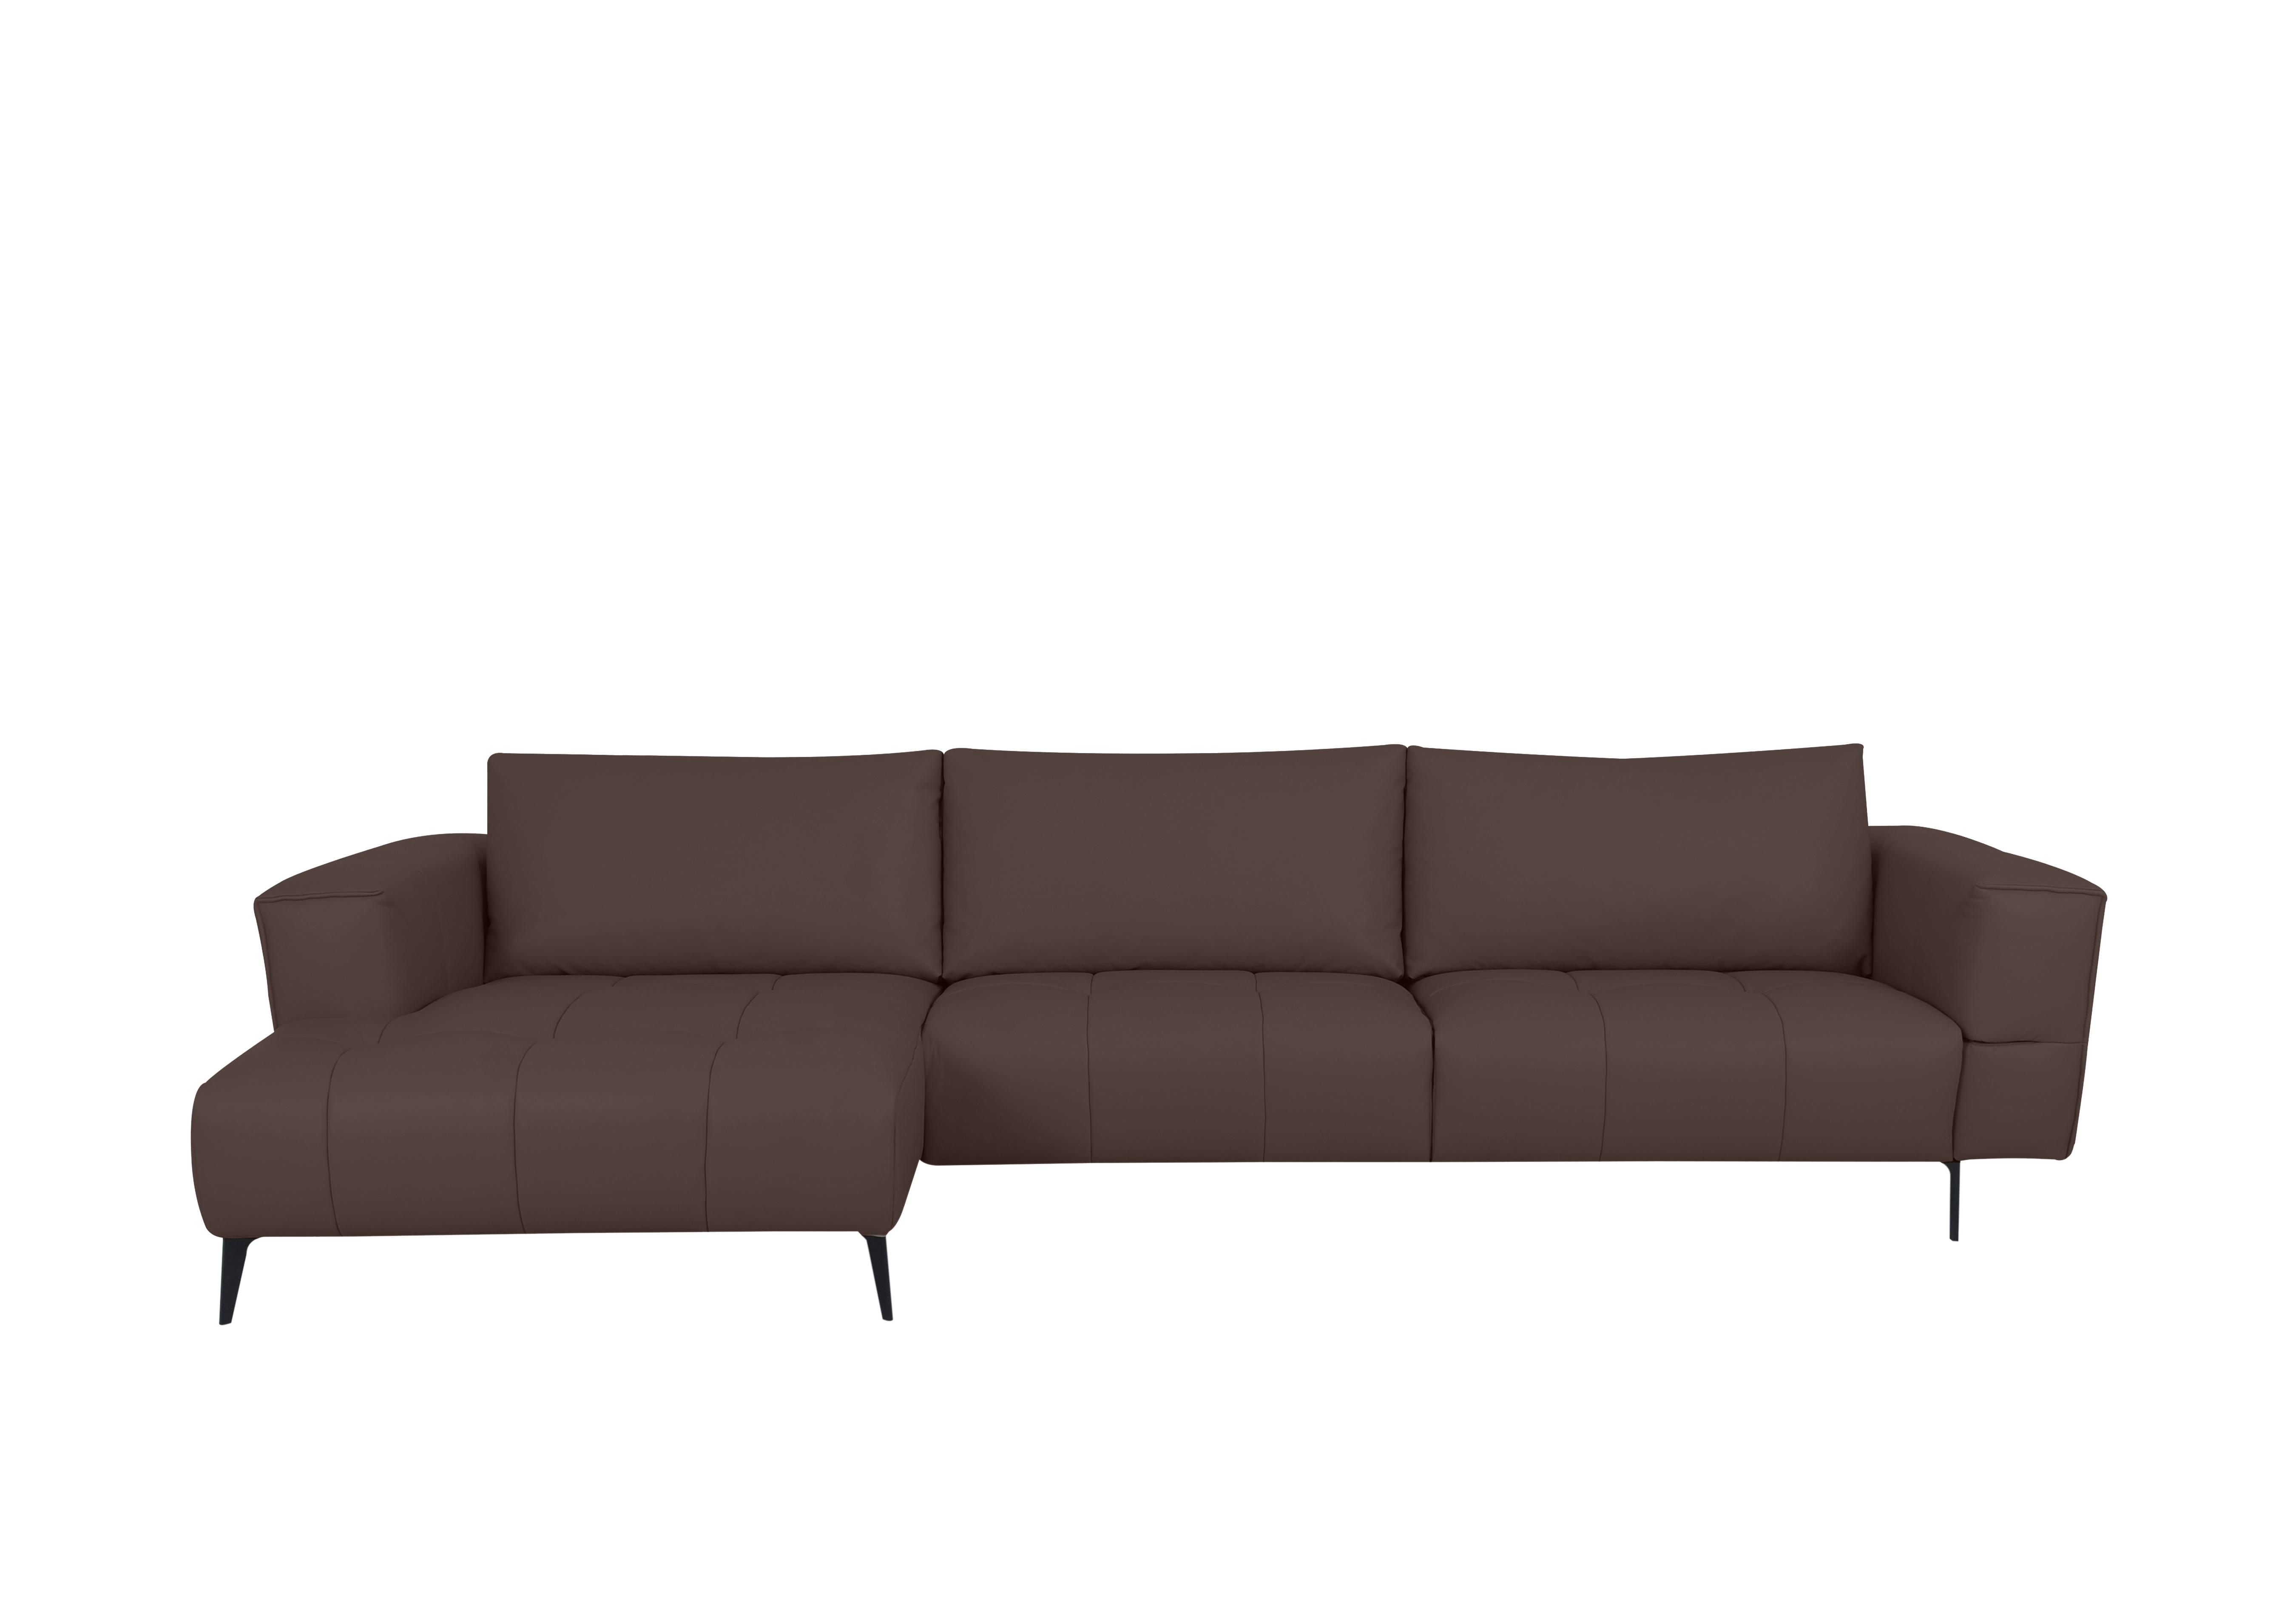 Lawson Leather Chaise End Sofa in Nn-512e Cacao Brown on Furniture Village